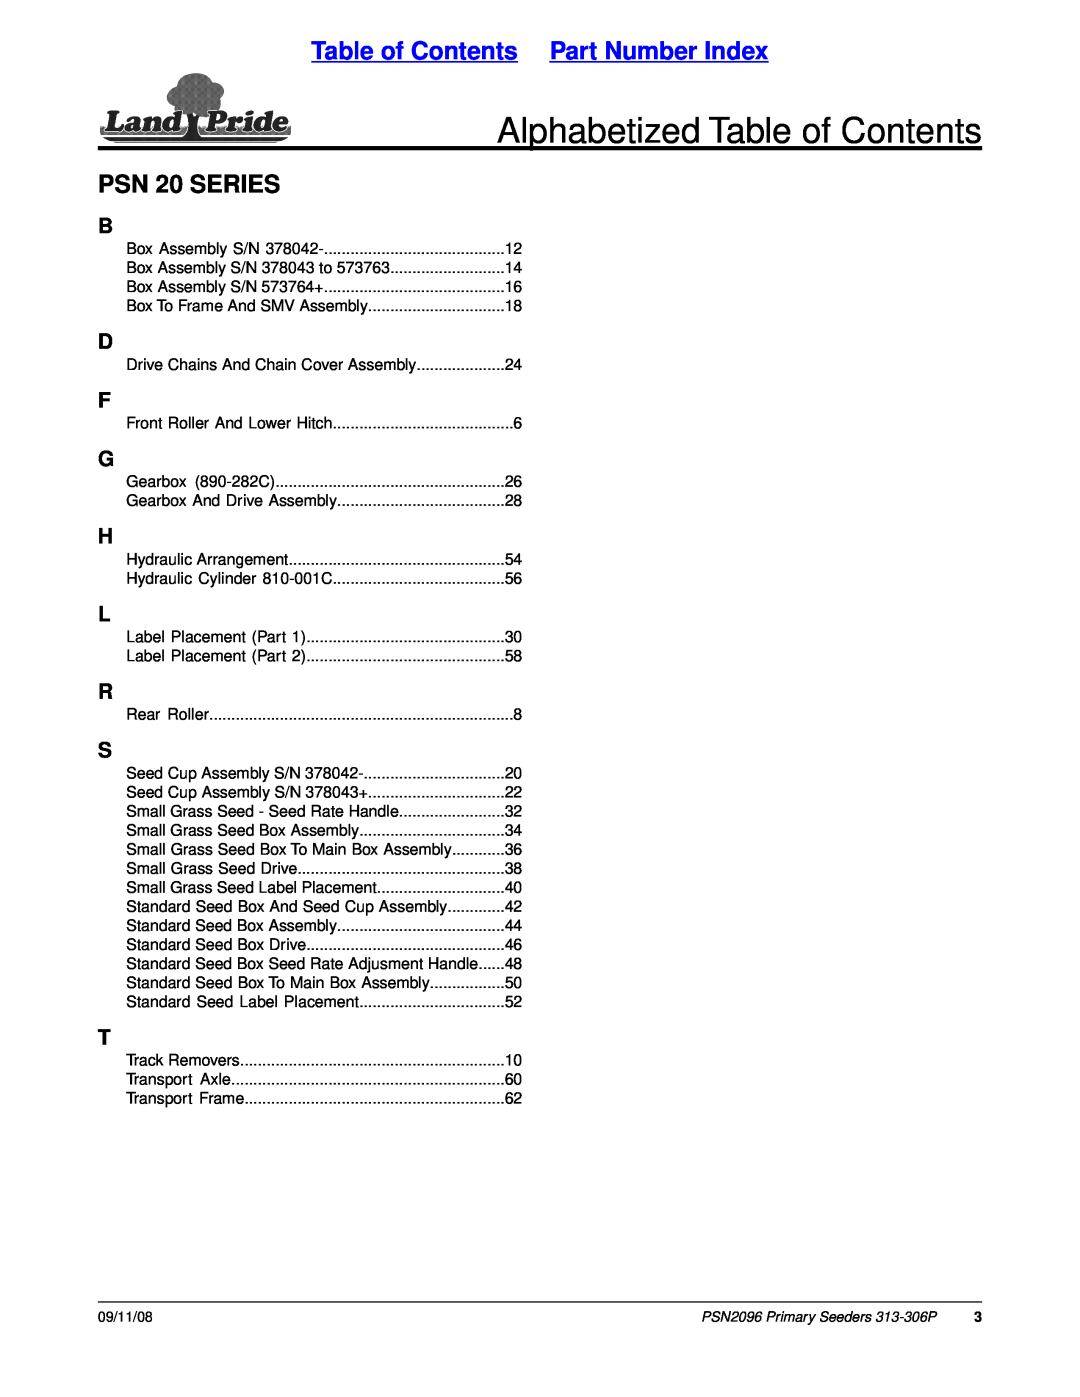 Land Pride PSN2096, 20583, 313-306P manual Alphabetized Table of Contents, Table of Contents Part Number Index, PSN 20 SERIES 